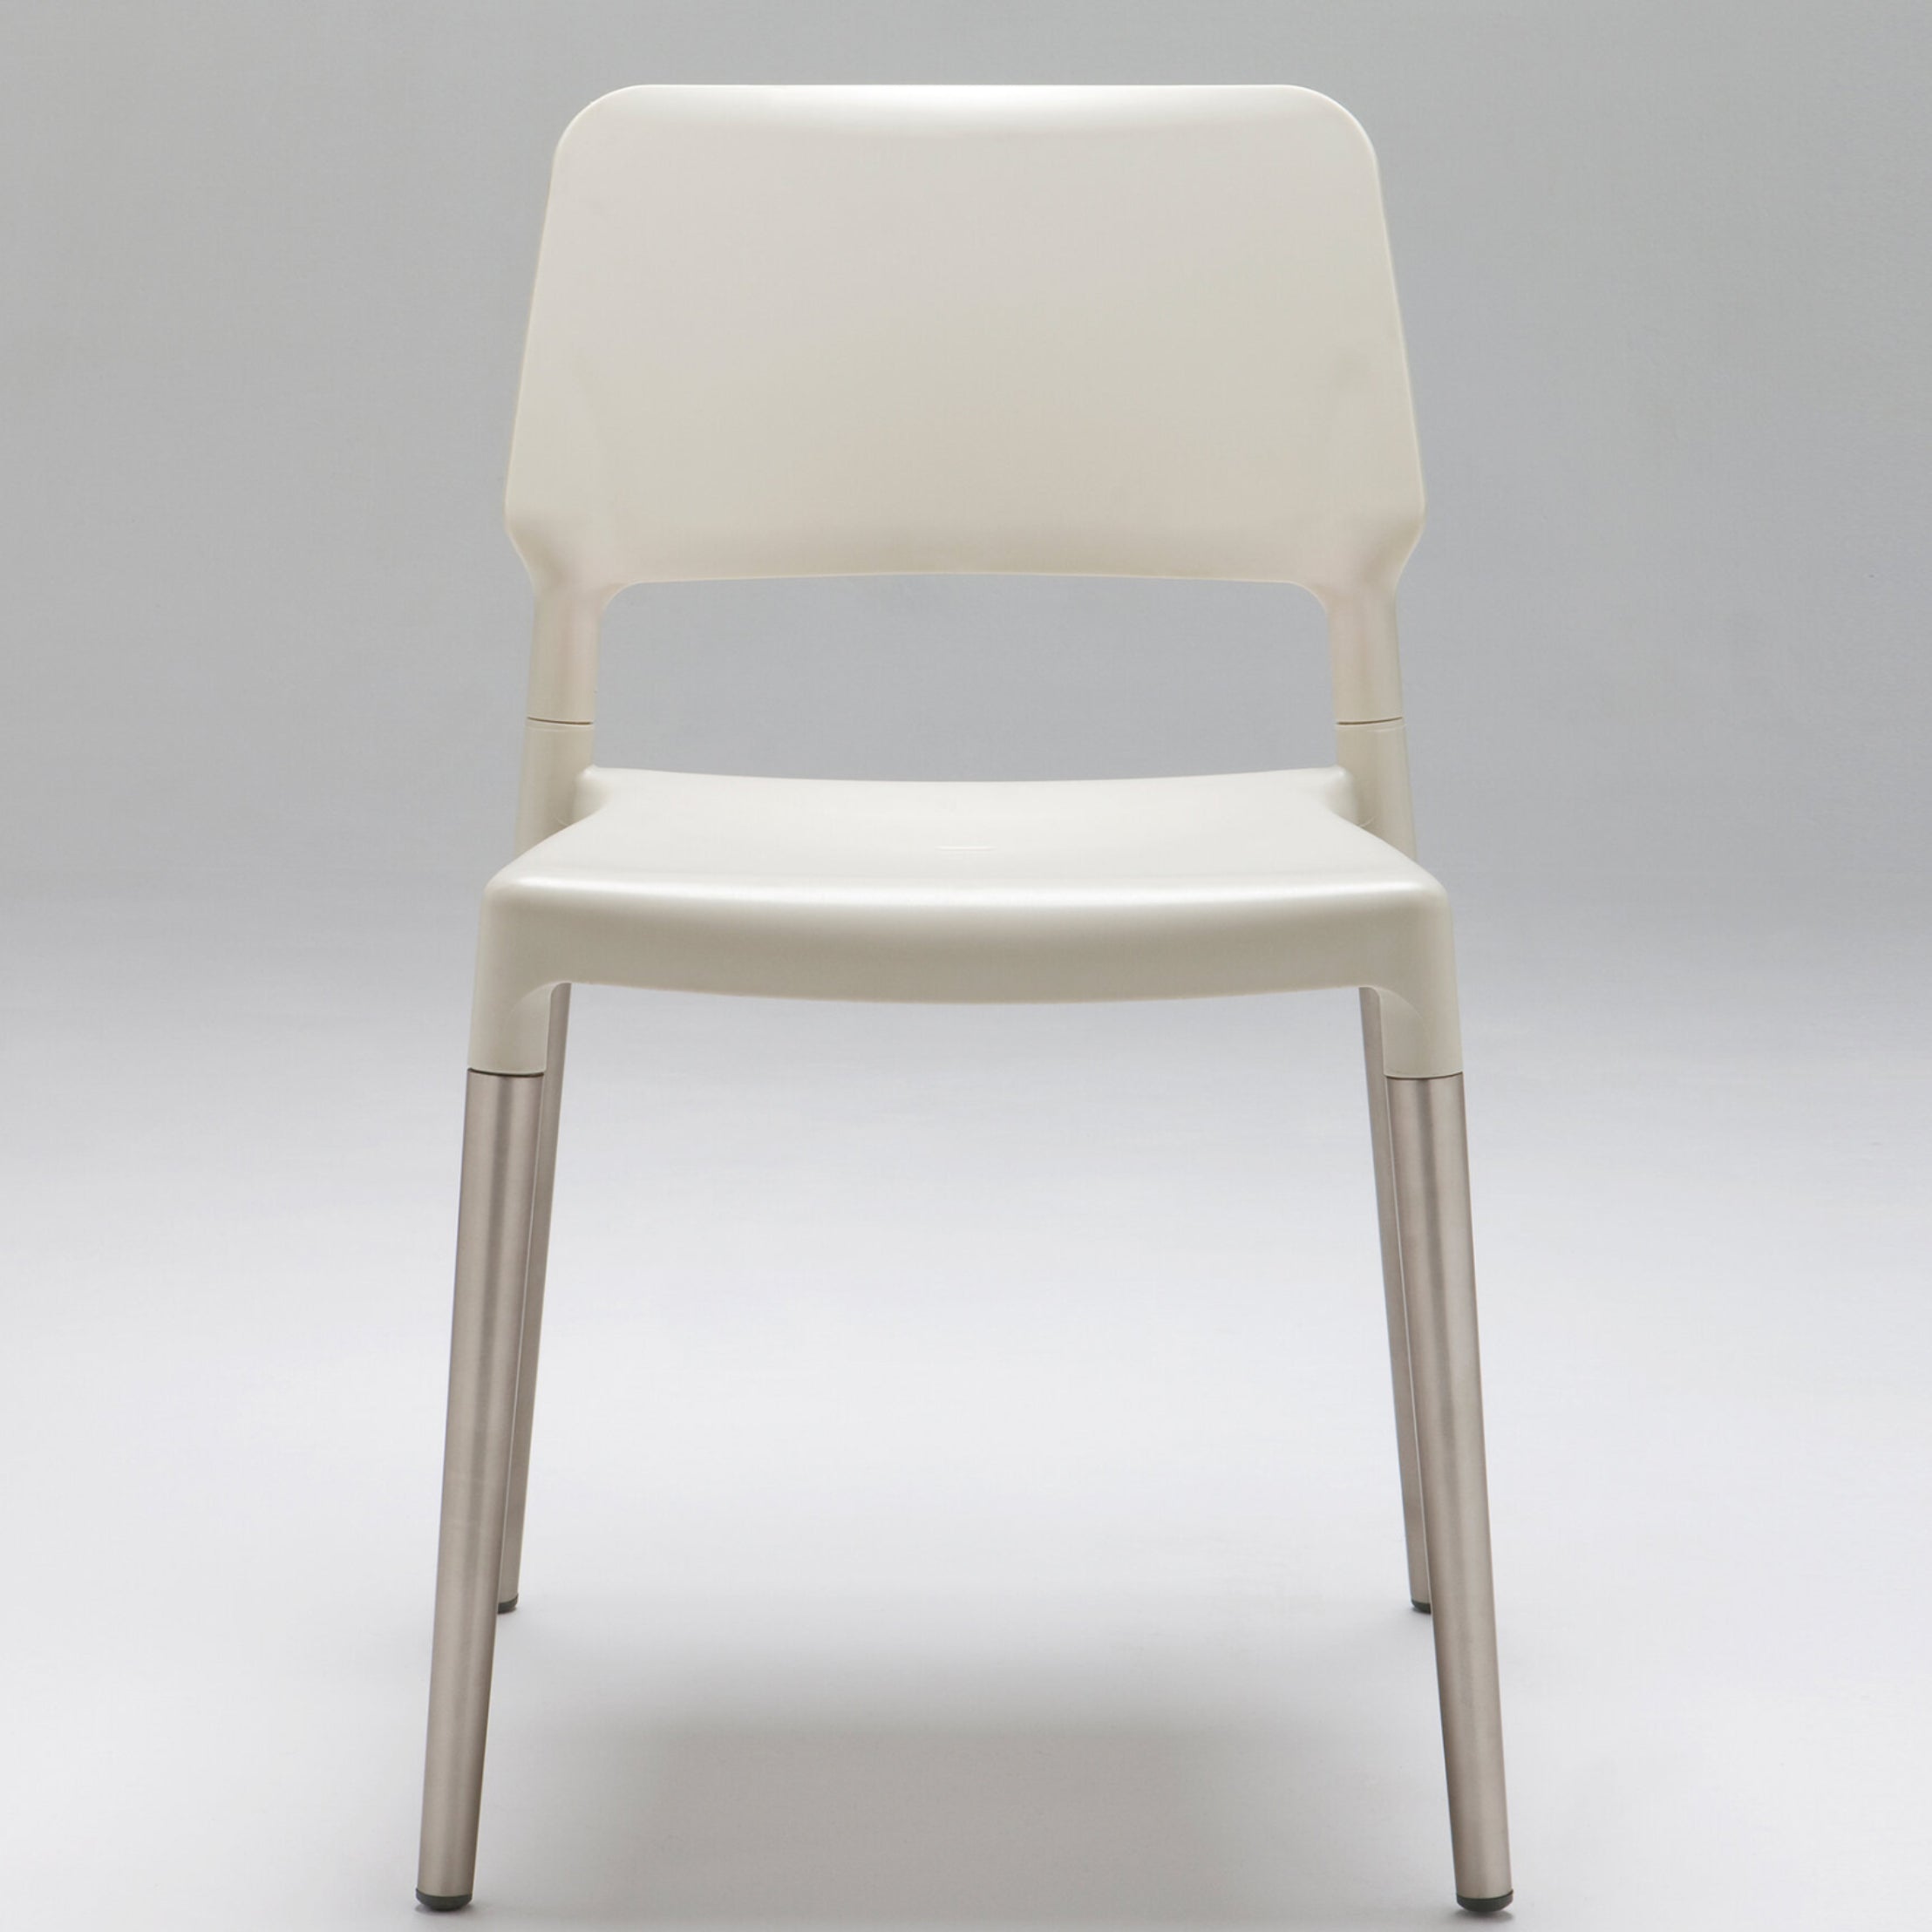 Belloch Chair: Outdoor + Stacking